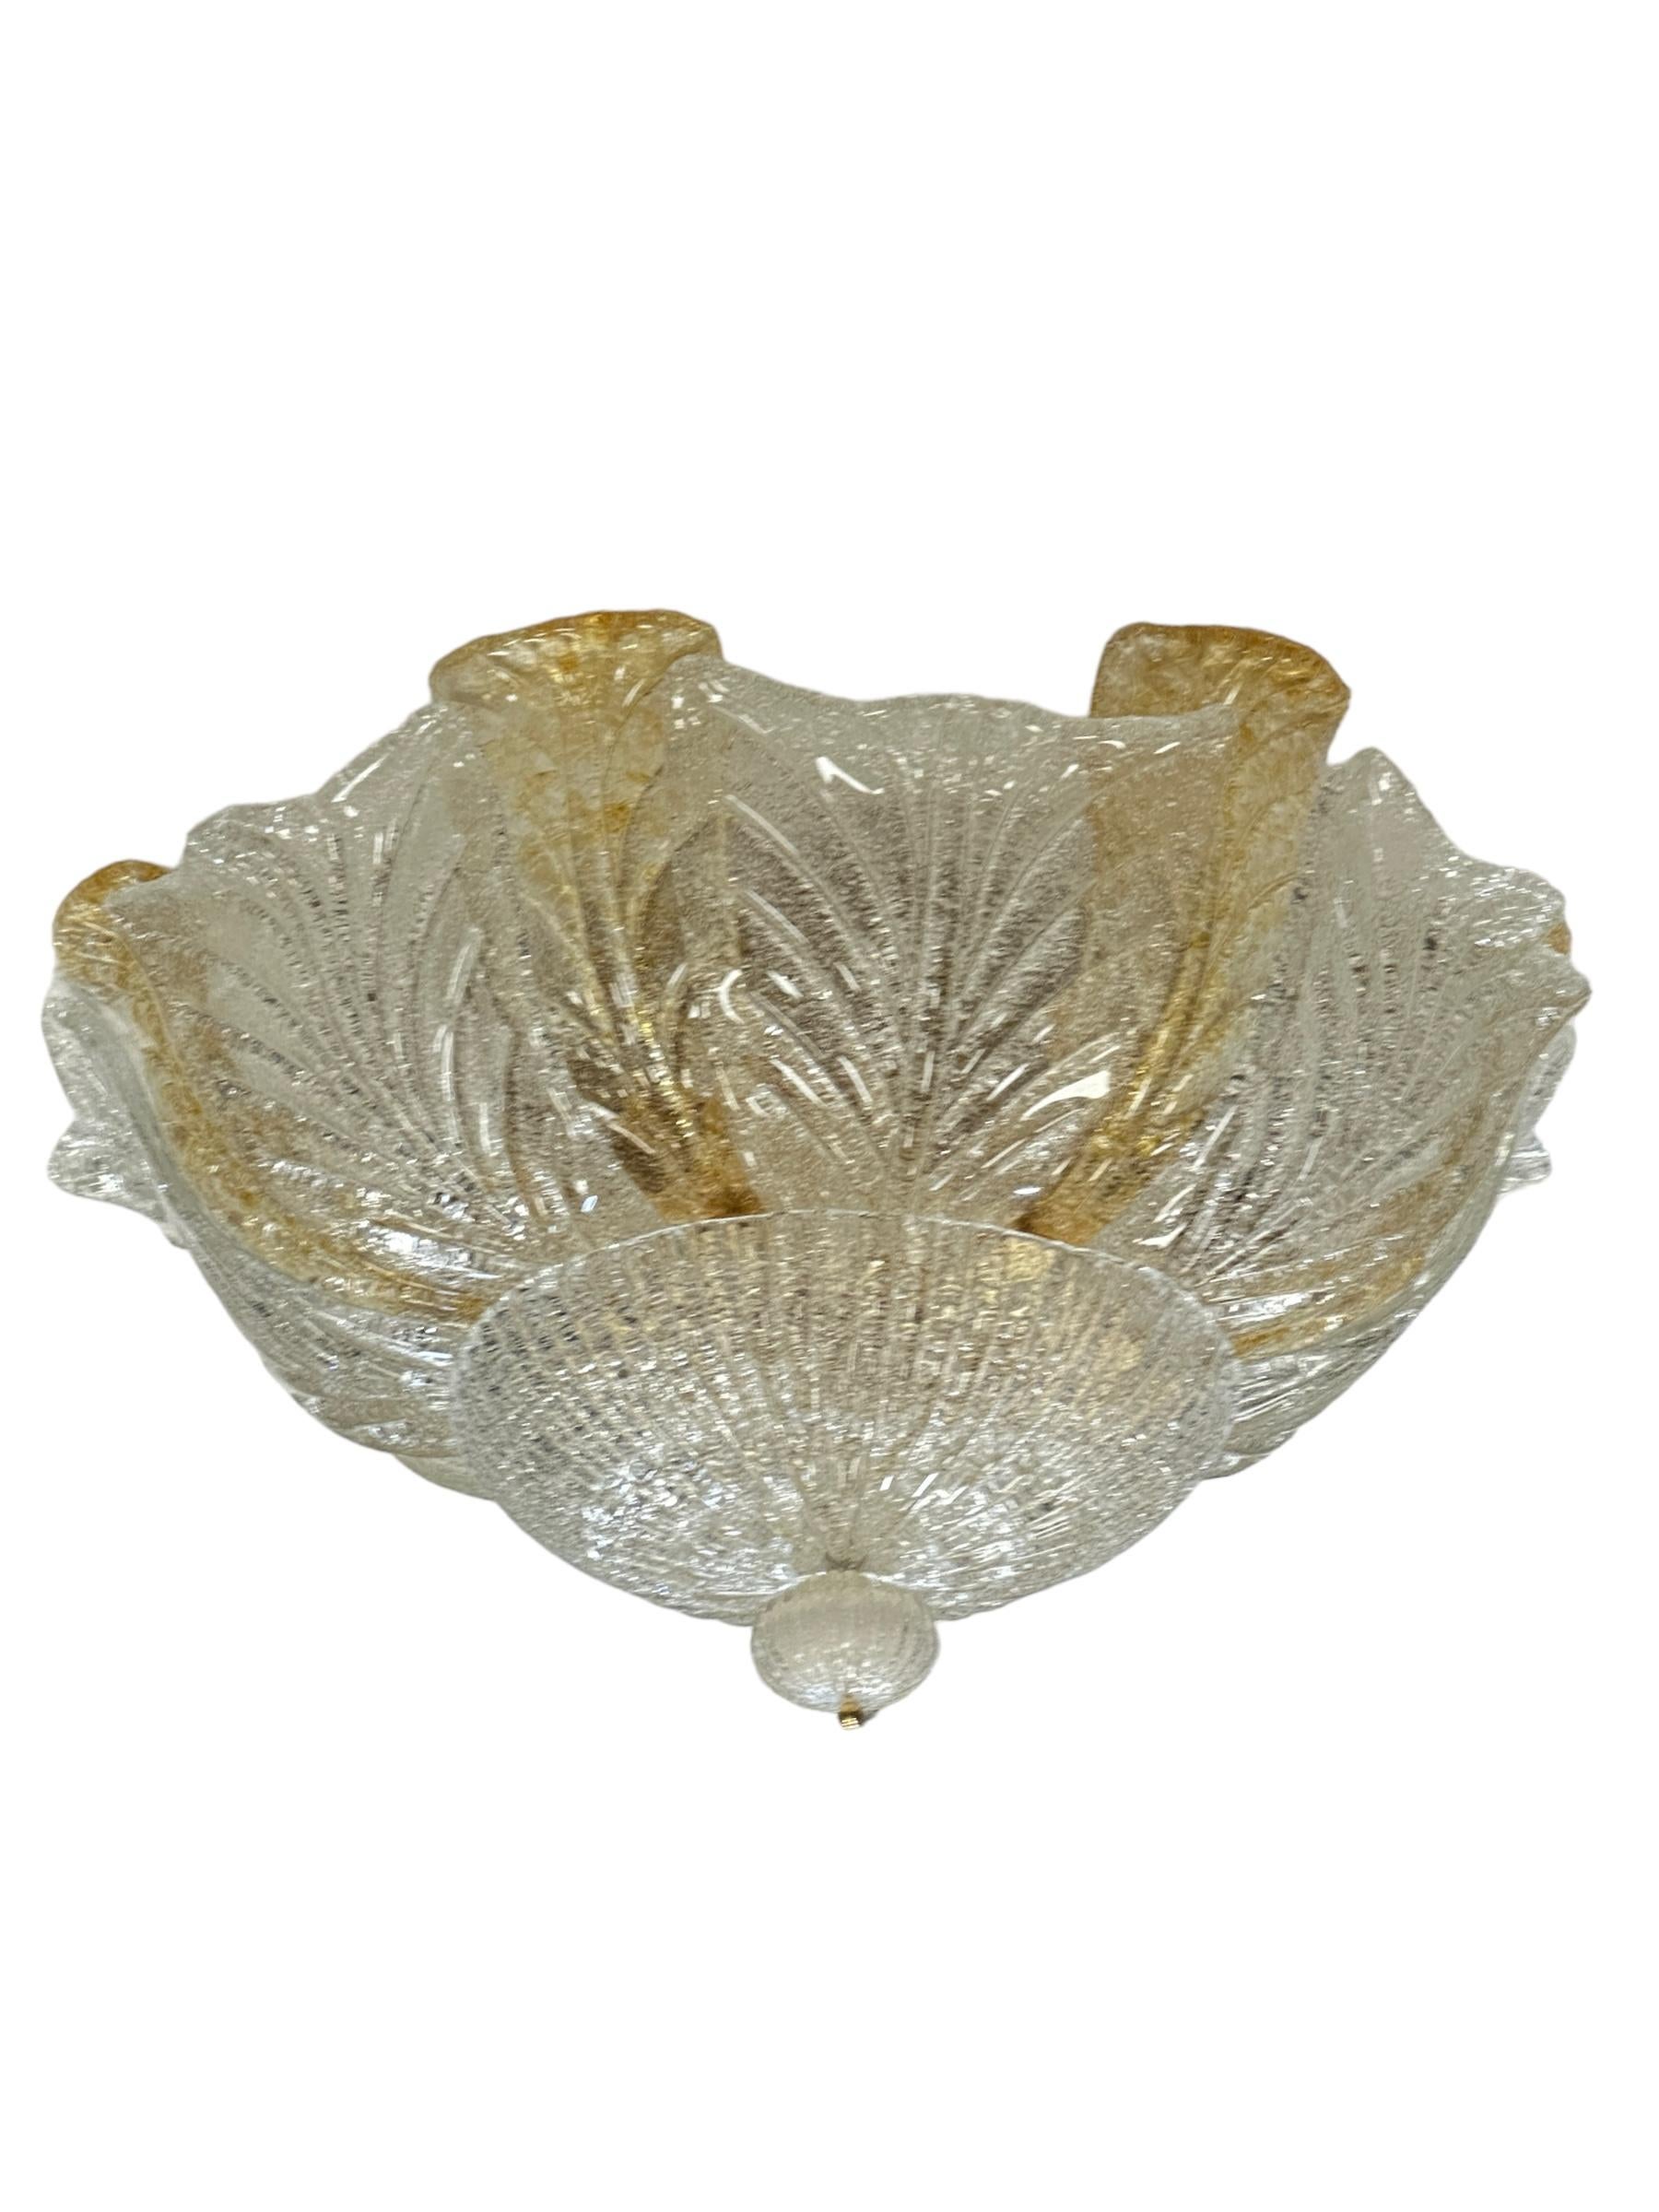 A large midcentury flush mounted Murano leaf glass chandelier, textured curved glass leaves on a large mounting plate with heavy metal ring. Fourteen curved discs of Murano glass, seven clear glass and seven gold flake smaller ones. The ceiling